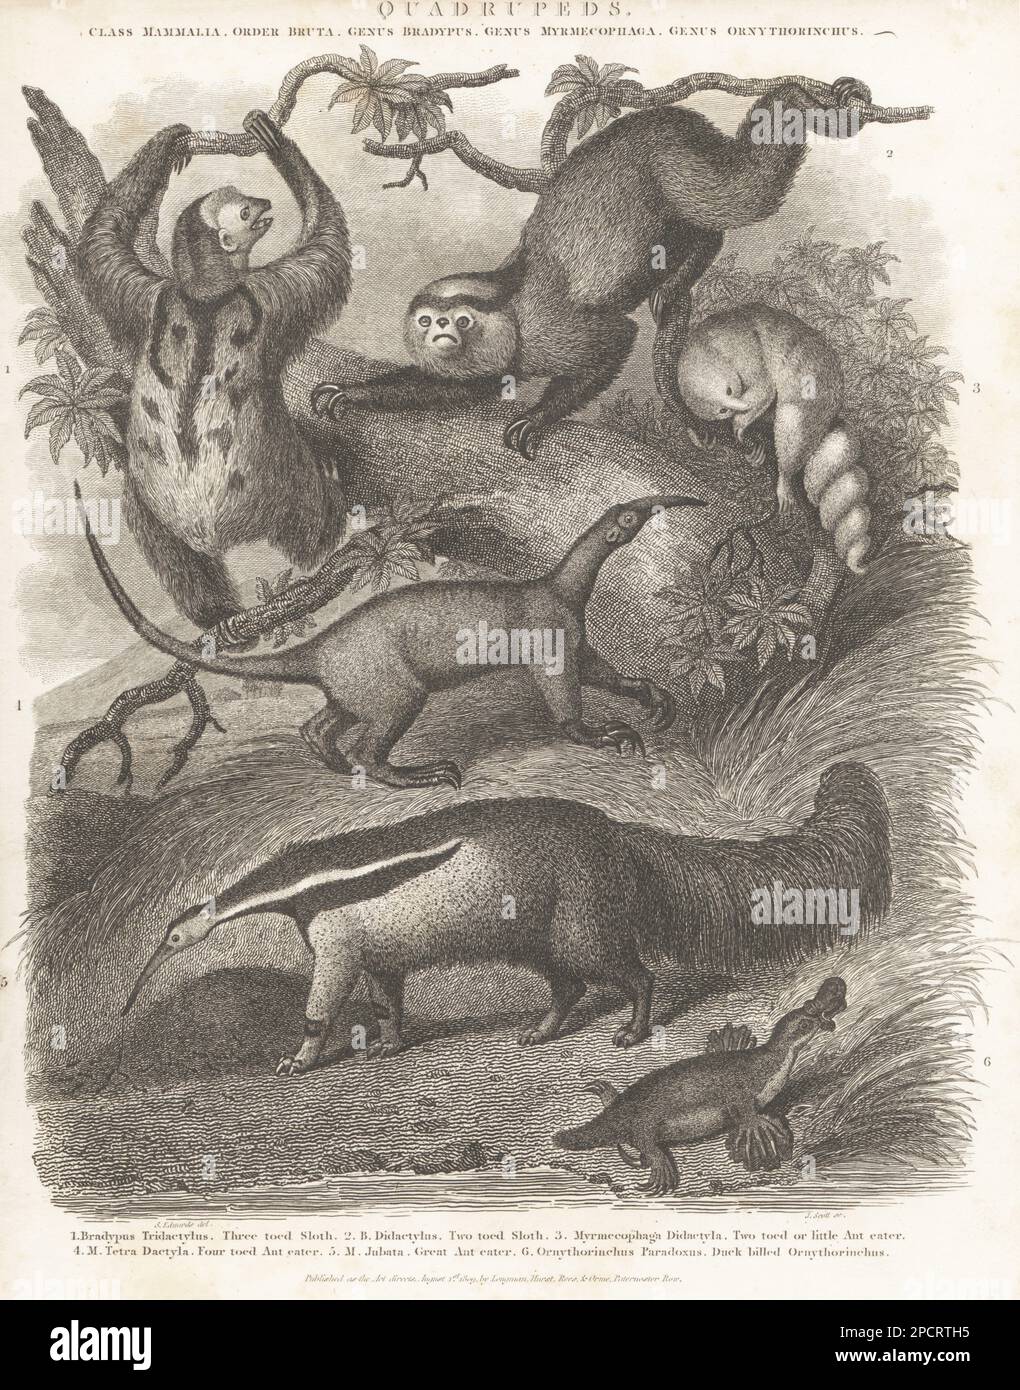 Pale-throated sloth, Bradypus tridactylus 1, Linnaeus's two-toed sloth, Choloepus didactylus 2, silky anteater, Cyclopes didactylus 3, collared anteater, Tamandua tetradactyla 4, giant anteater, Myrmecophaga tridactyla 5, and platypus, Ornithorhynchus anatinus 6. Copperplate engraving by J. Scott after Sydenham Edwards from Abraham Rees' Cyclopedia or Universal Dictionary of Arts, Sciences and Literature, Longman, Hurst, Rees, Orme, Paternoster Row, London, August 1, 1809. Stock Photo